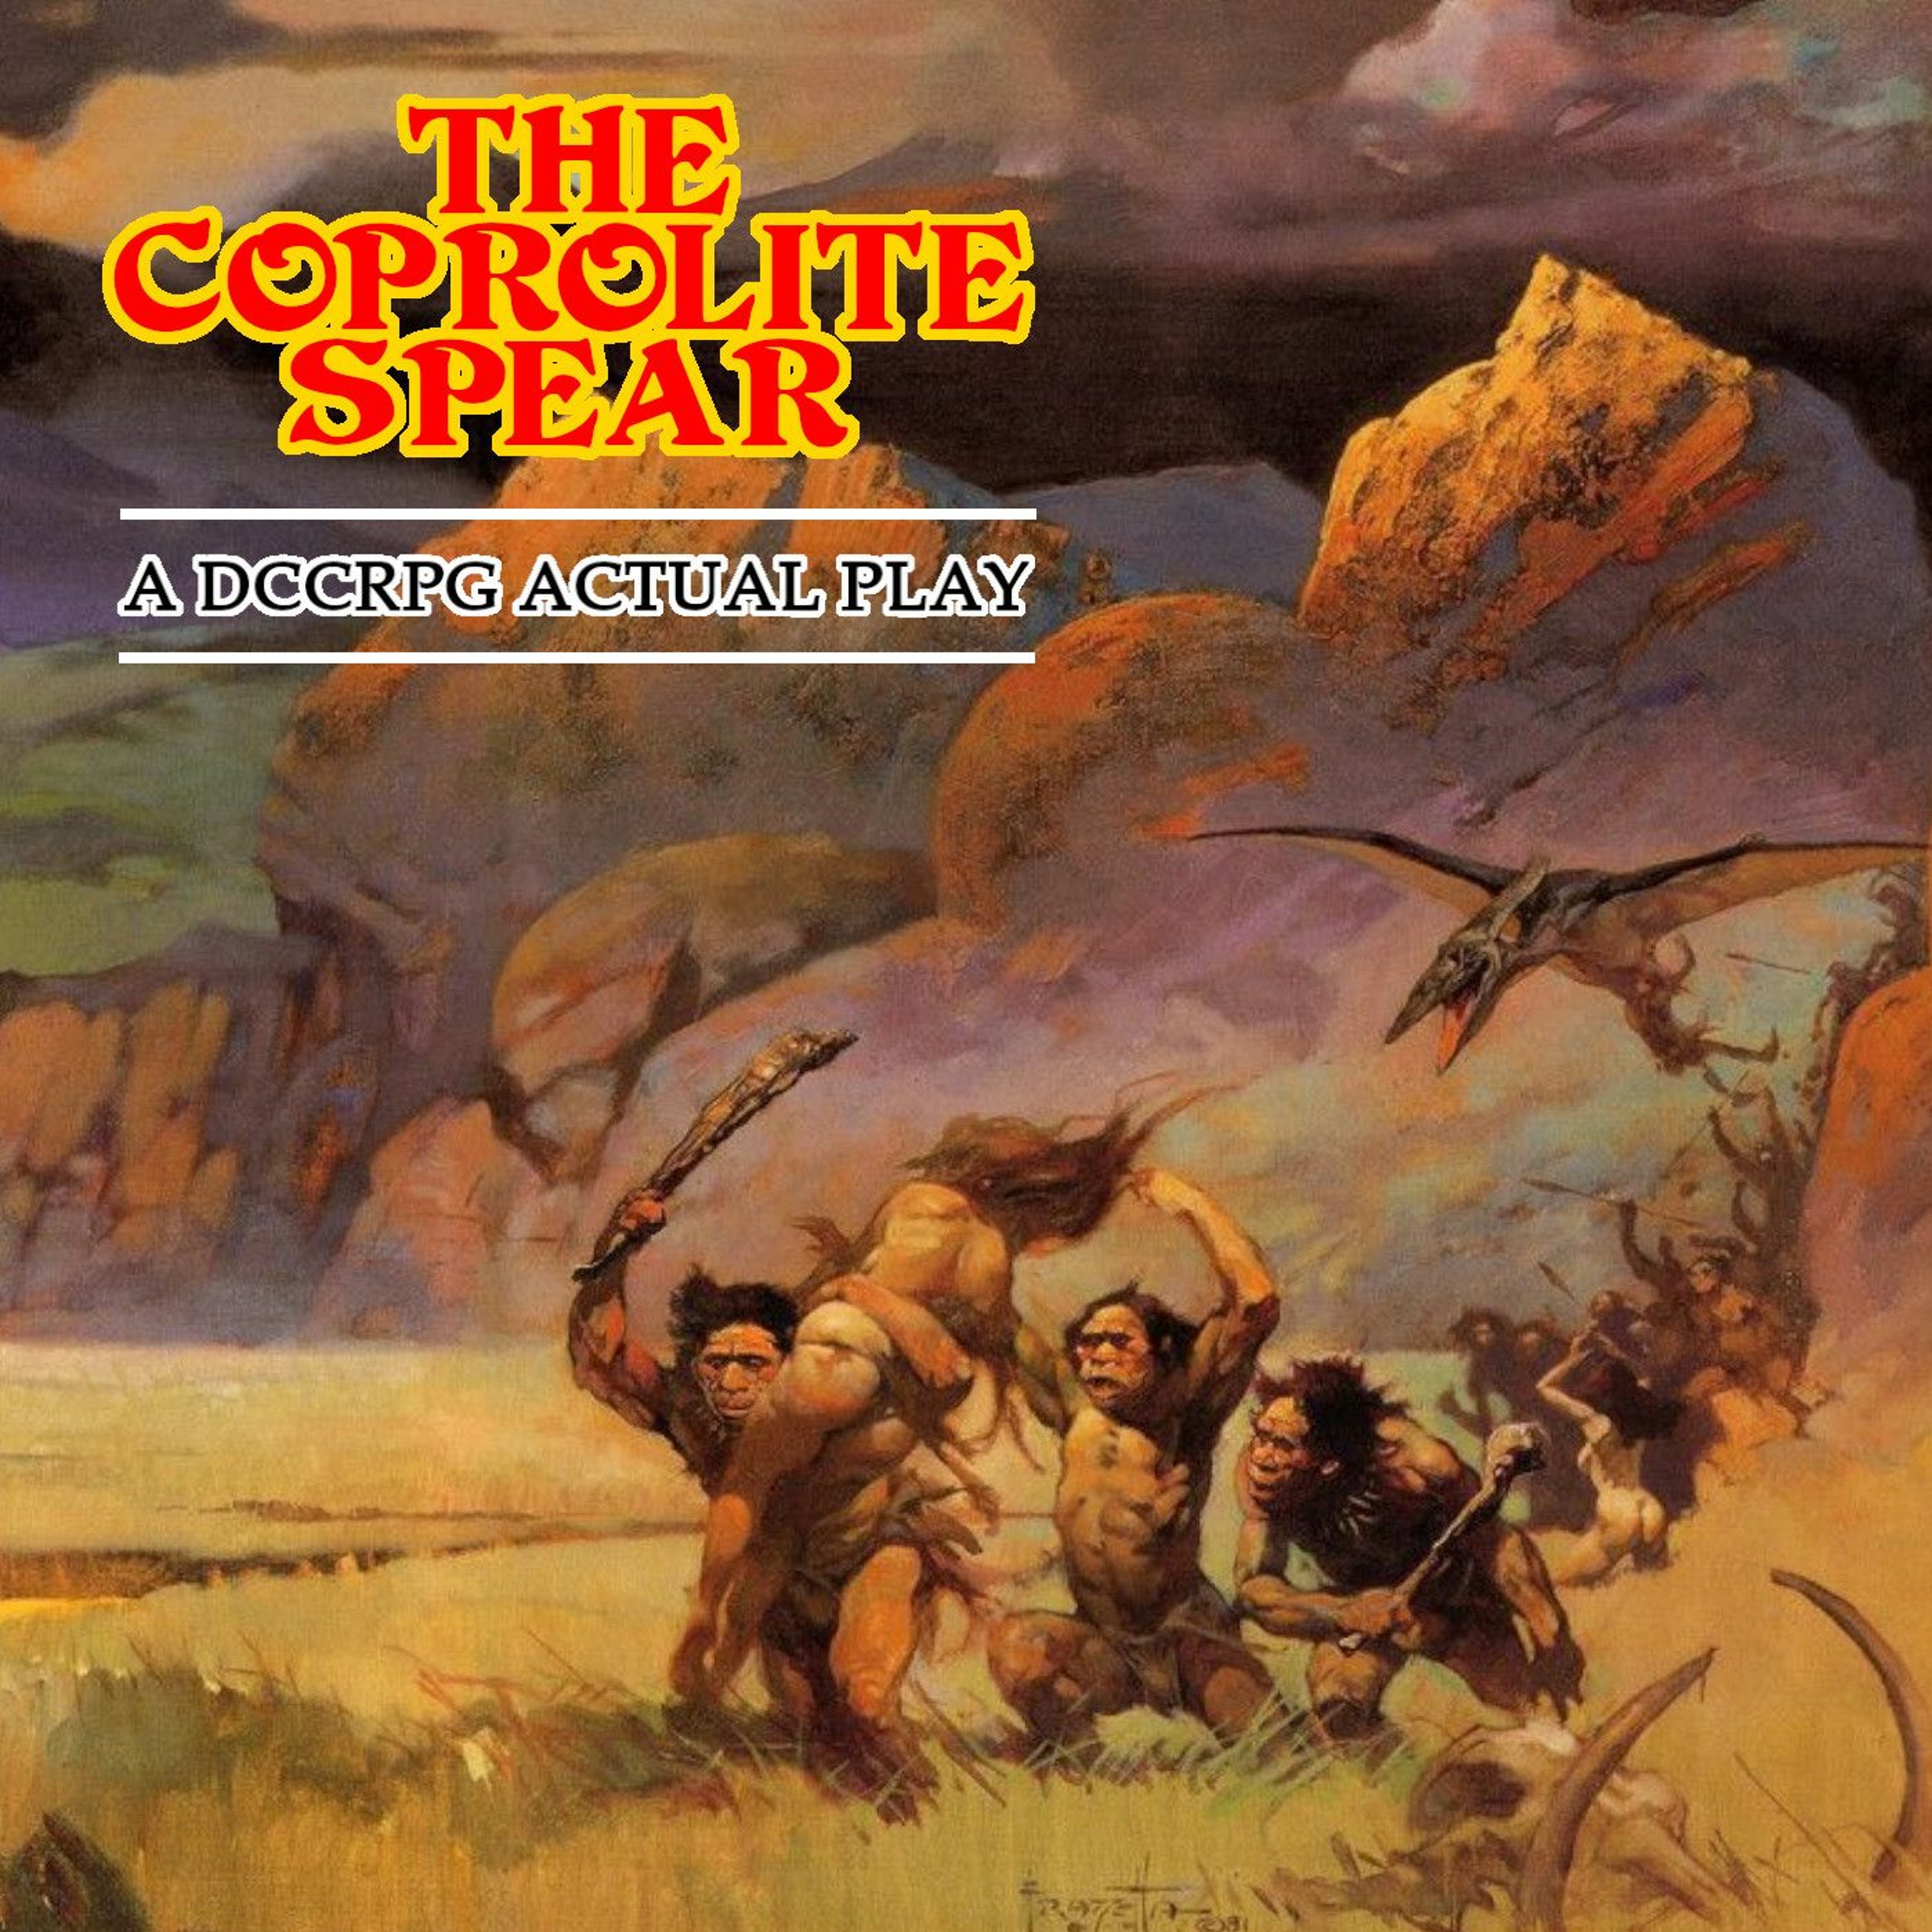 The Coprolite Spear 01 - Jumping the Shark (DCC RPG Actual Play)